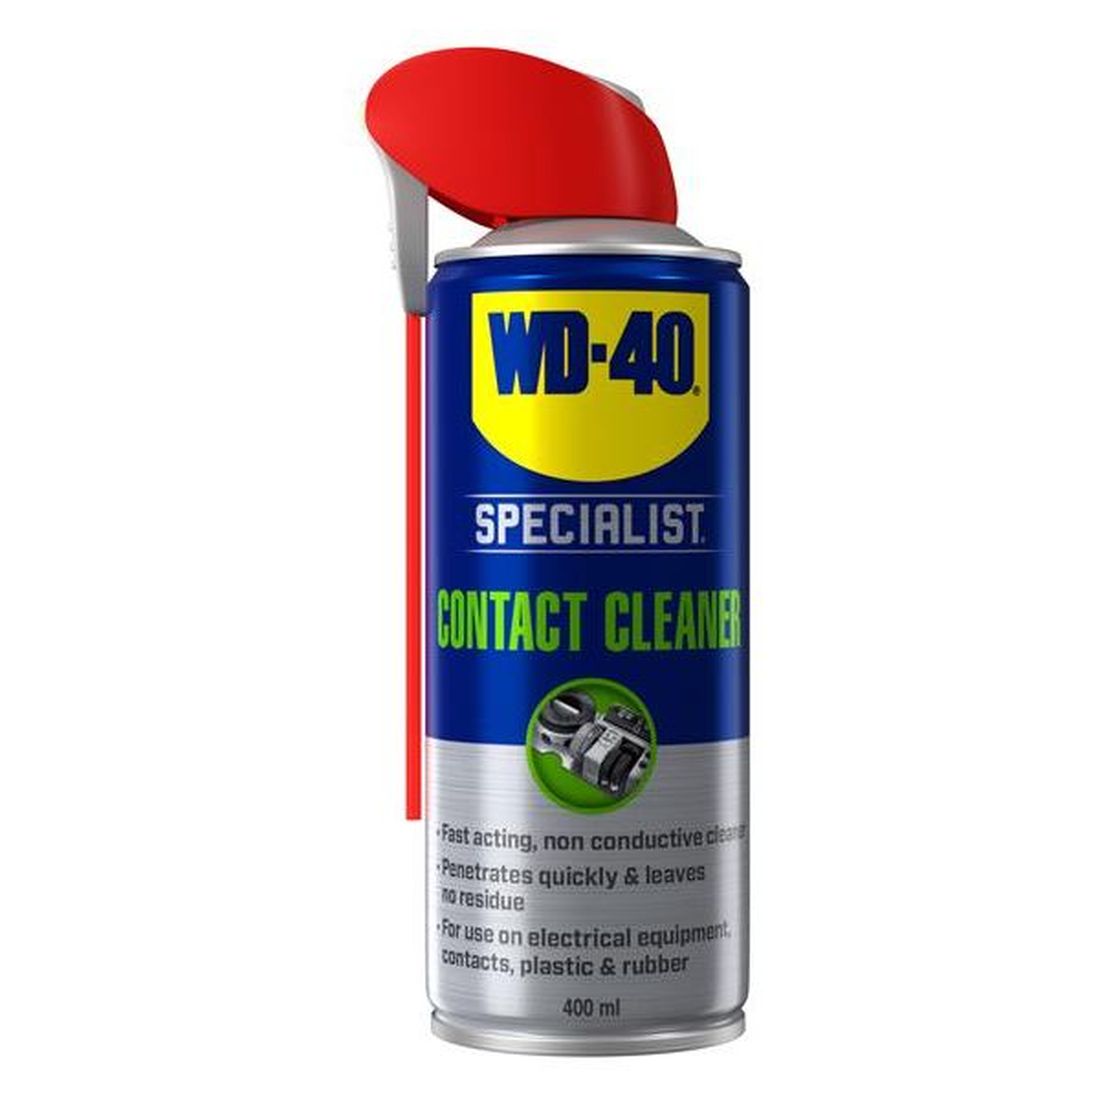 WD-40 WD-40 Specialist Contact Cleaner 400ml                                         